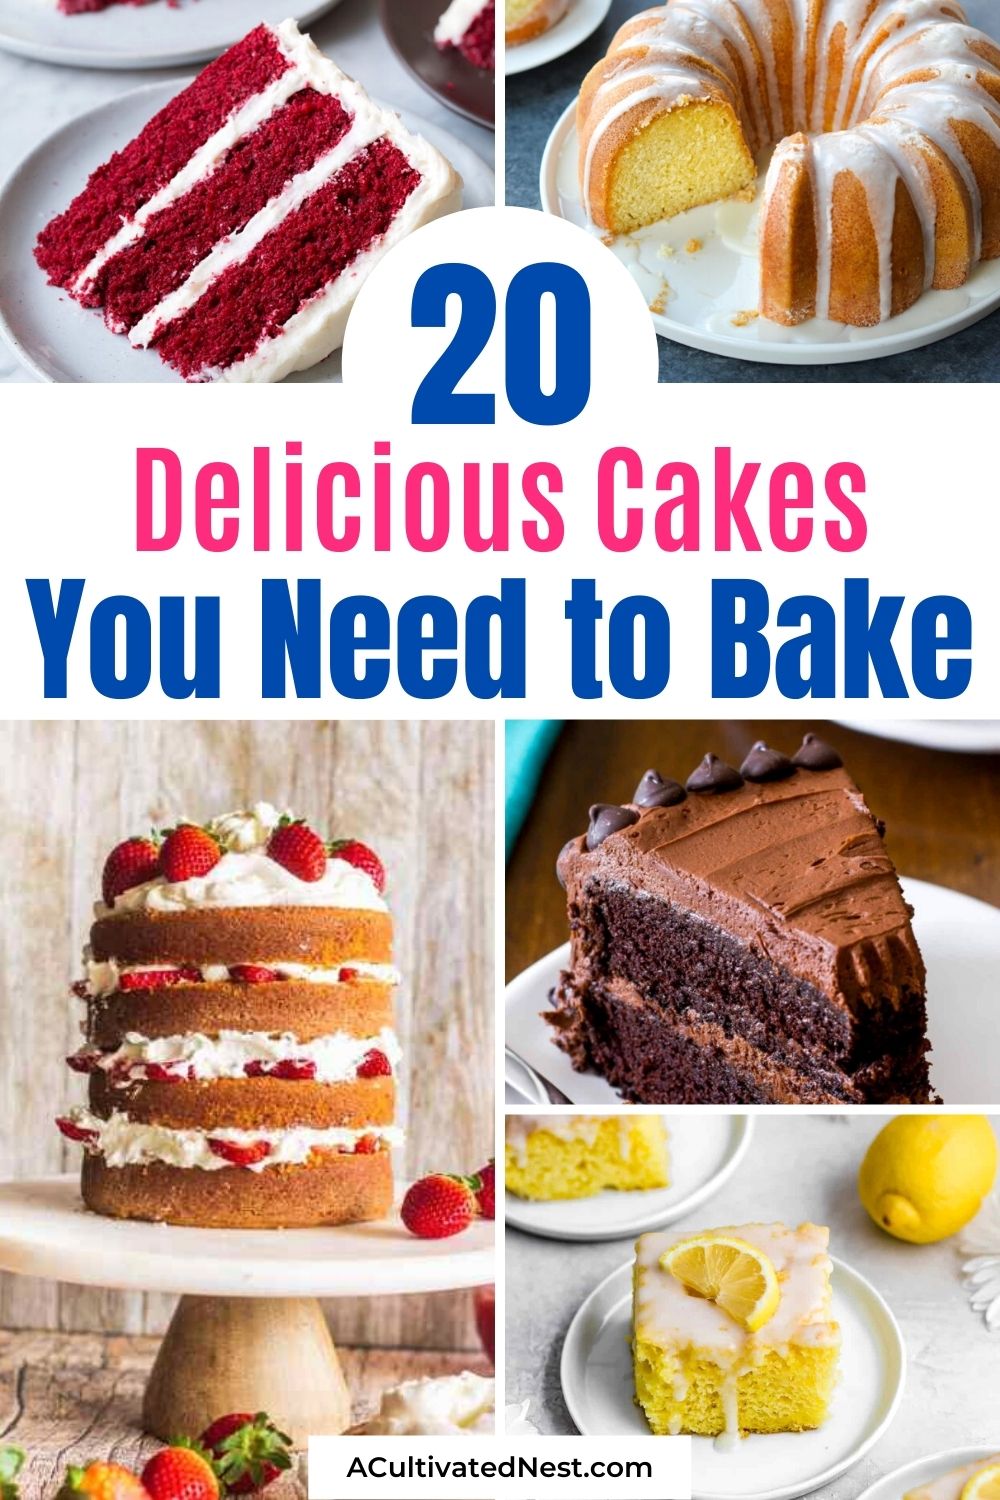 20 Delicious Cake Recipes You Need to Bake- If you need a cake recipe for a birthday, anniversary, or just want something sweet and satisfying, these delicious cake recipes are sure to hit the spot! | #desserts #cakeRecipes #baking #dessertRecipes #ACultivatedNest